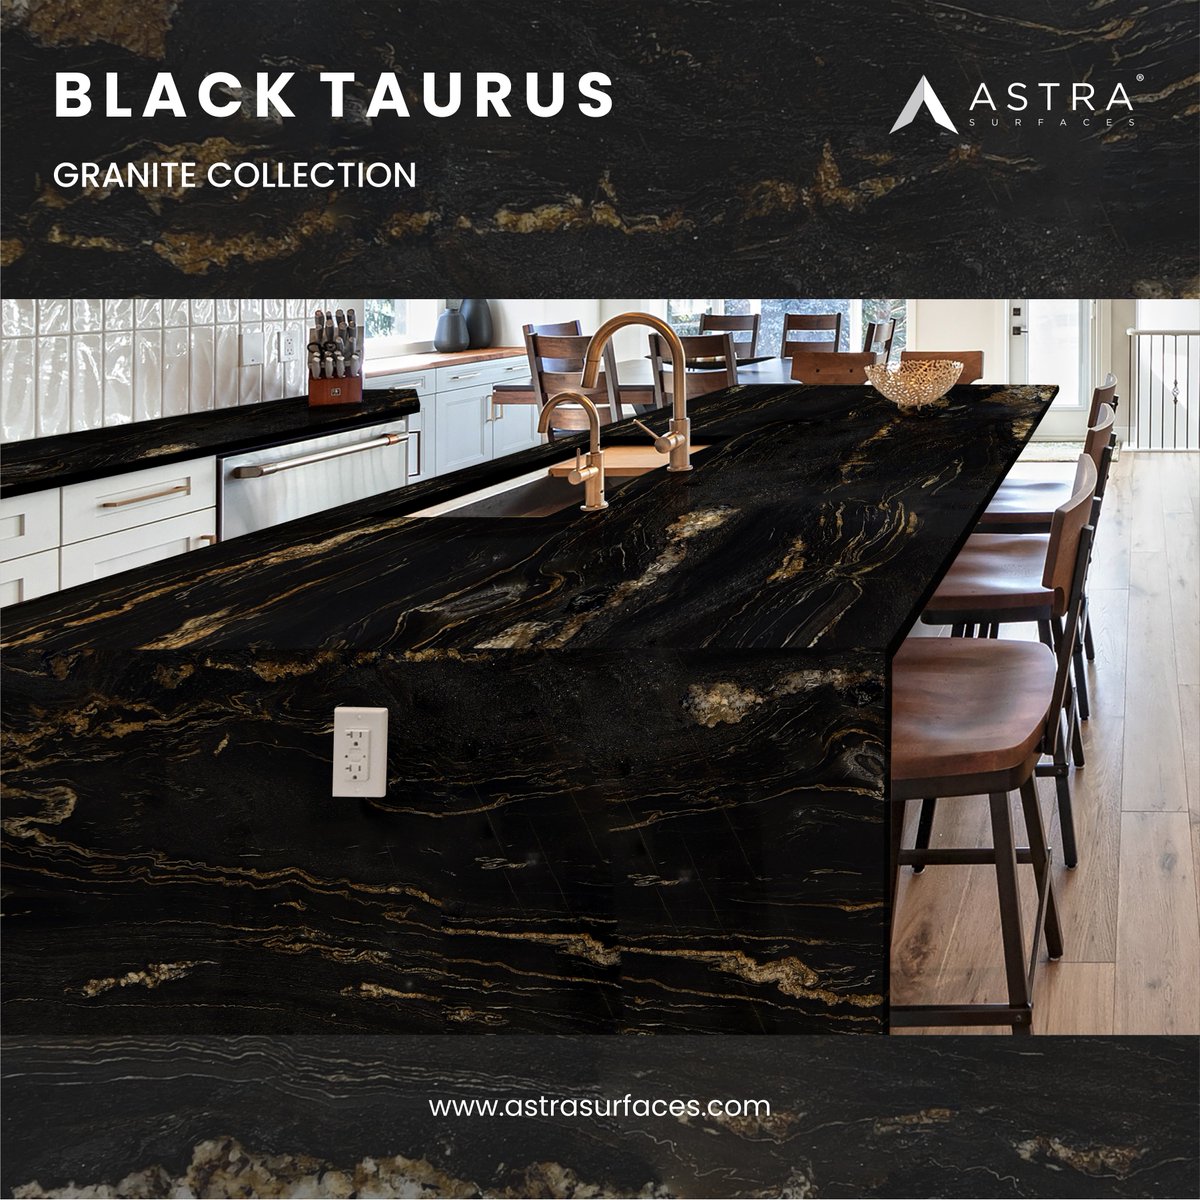 Experience the artistry of Black Taurus #Granite , a durable and stunning choice for your residential and commercial #interiors. Nature's beauty meets everyday resilience in this perfect blend of black and gold.

#naturalstone #granitecountertops #countertops #interiordesign